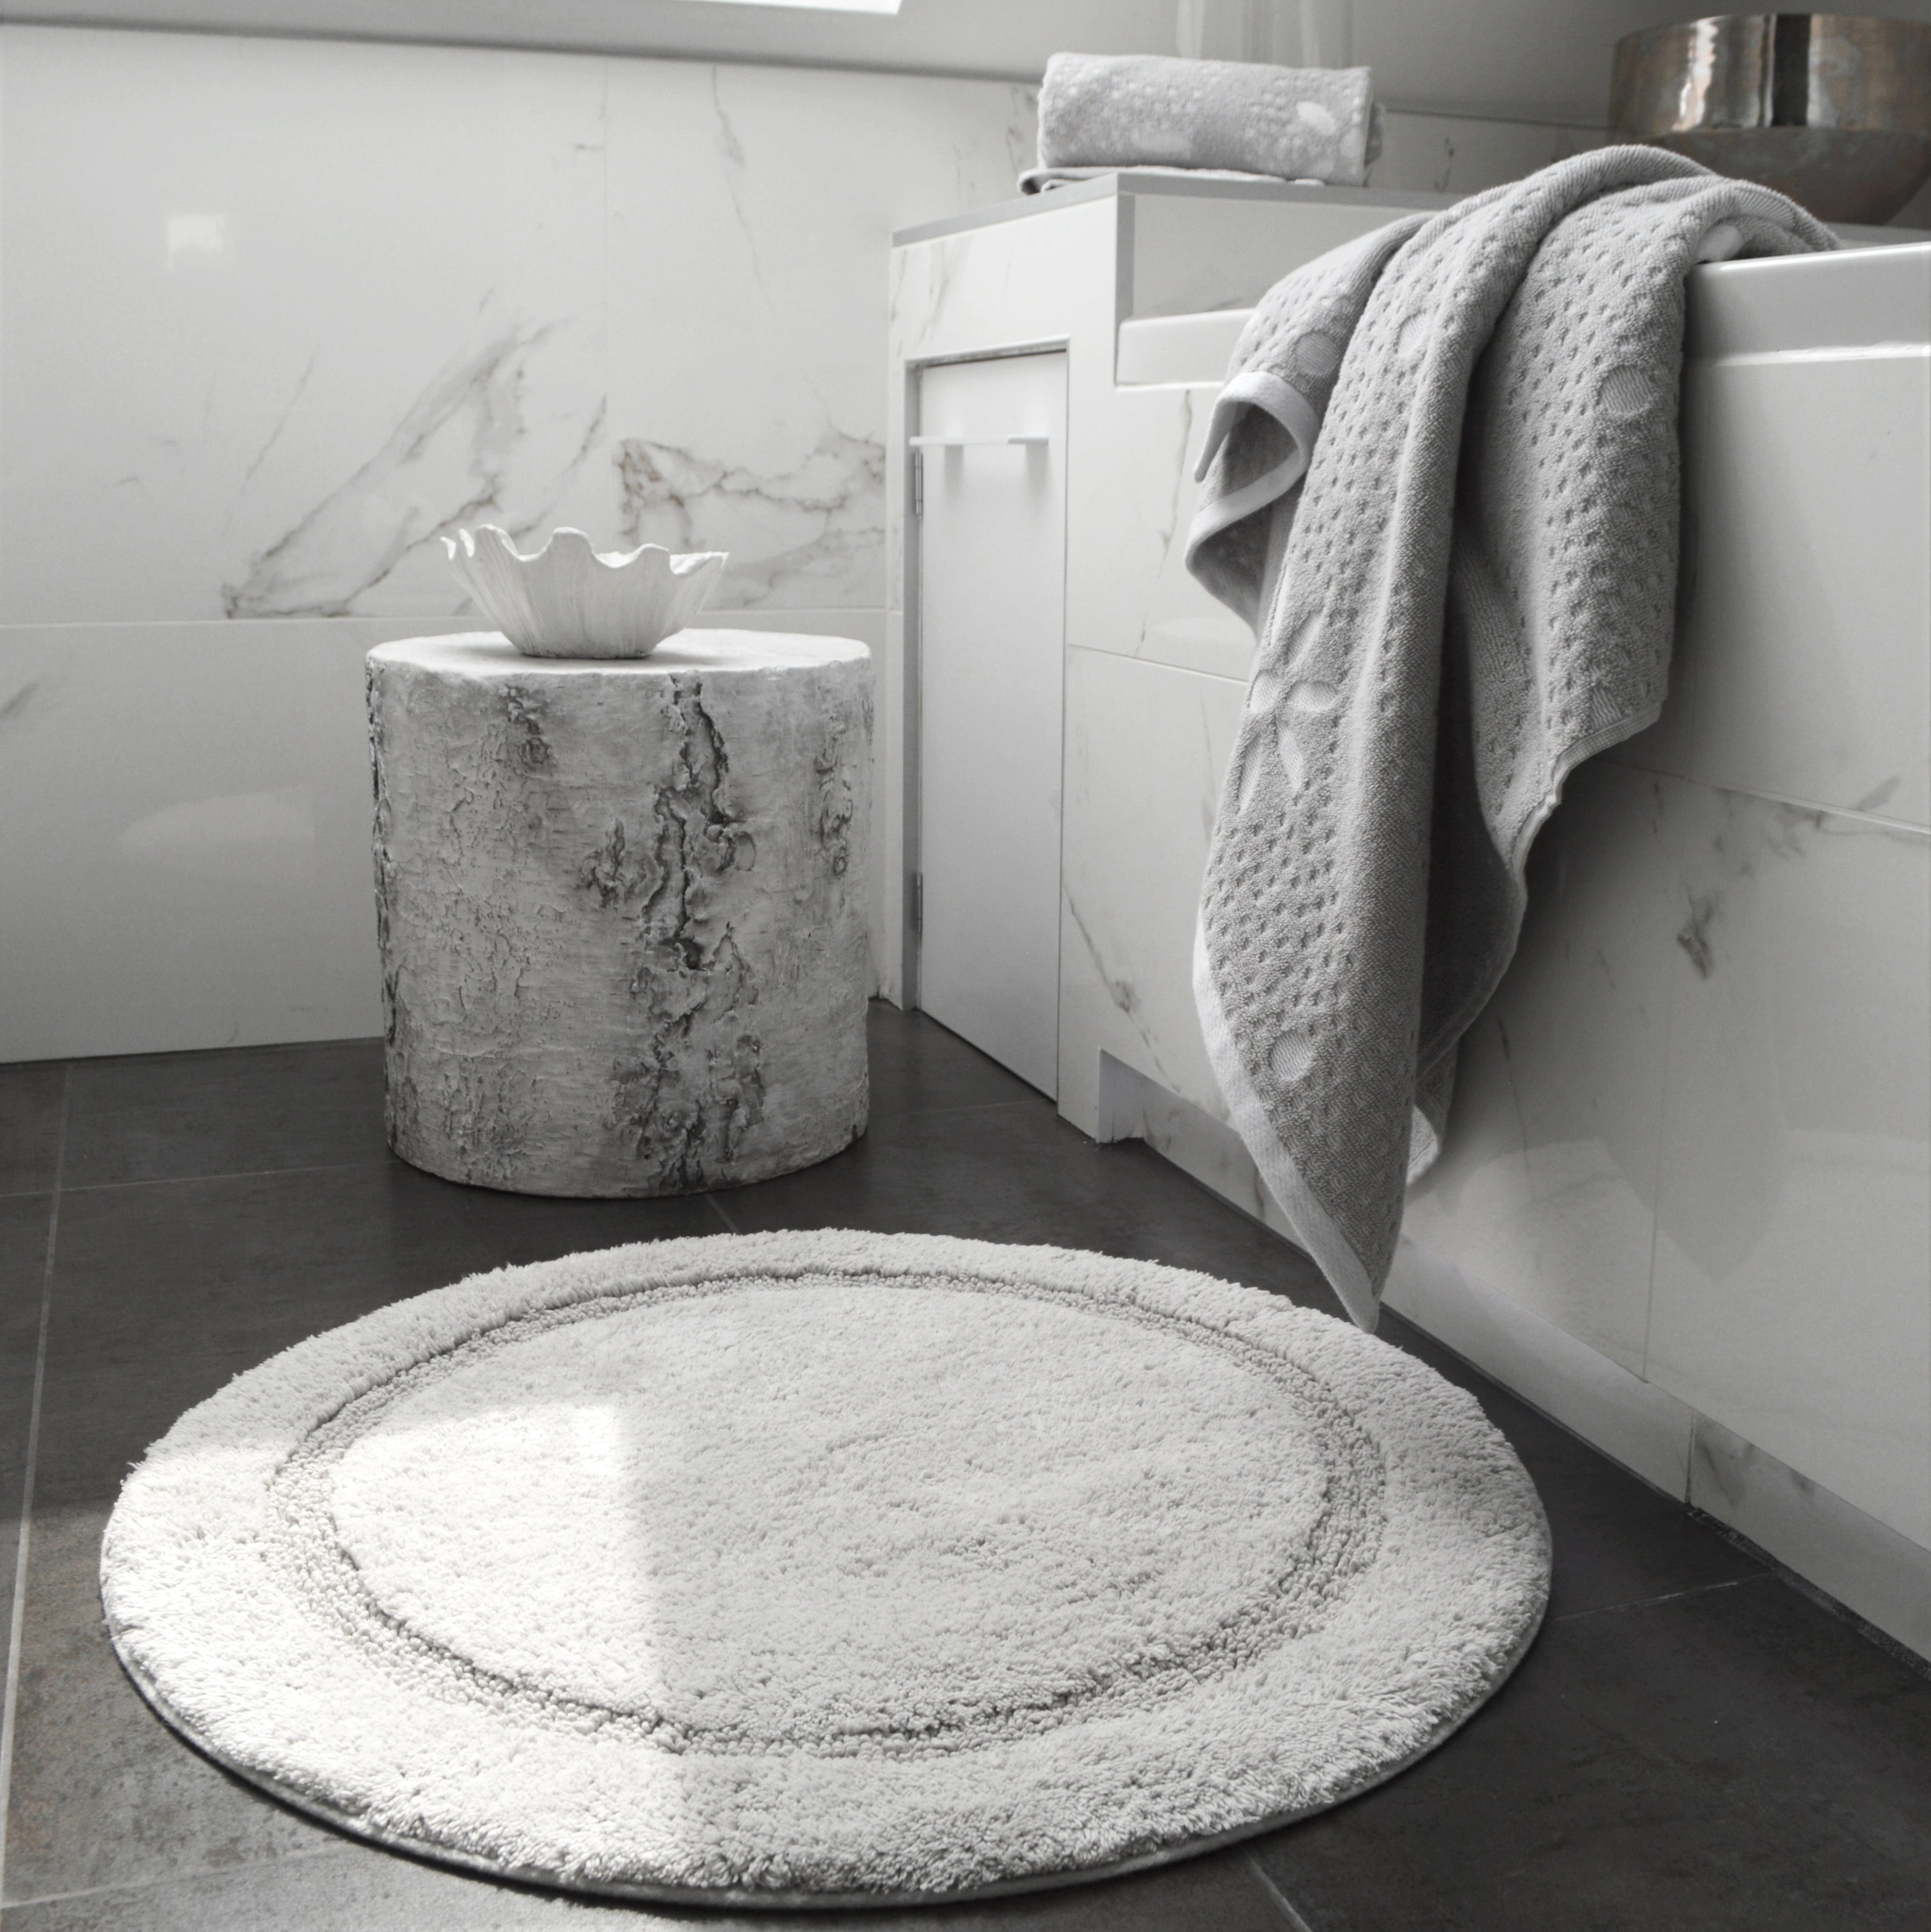 Dove grey round bath mat and co-ordinating towels.